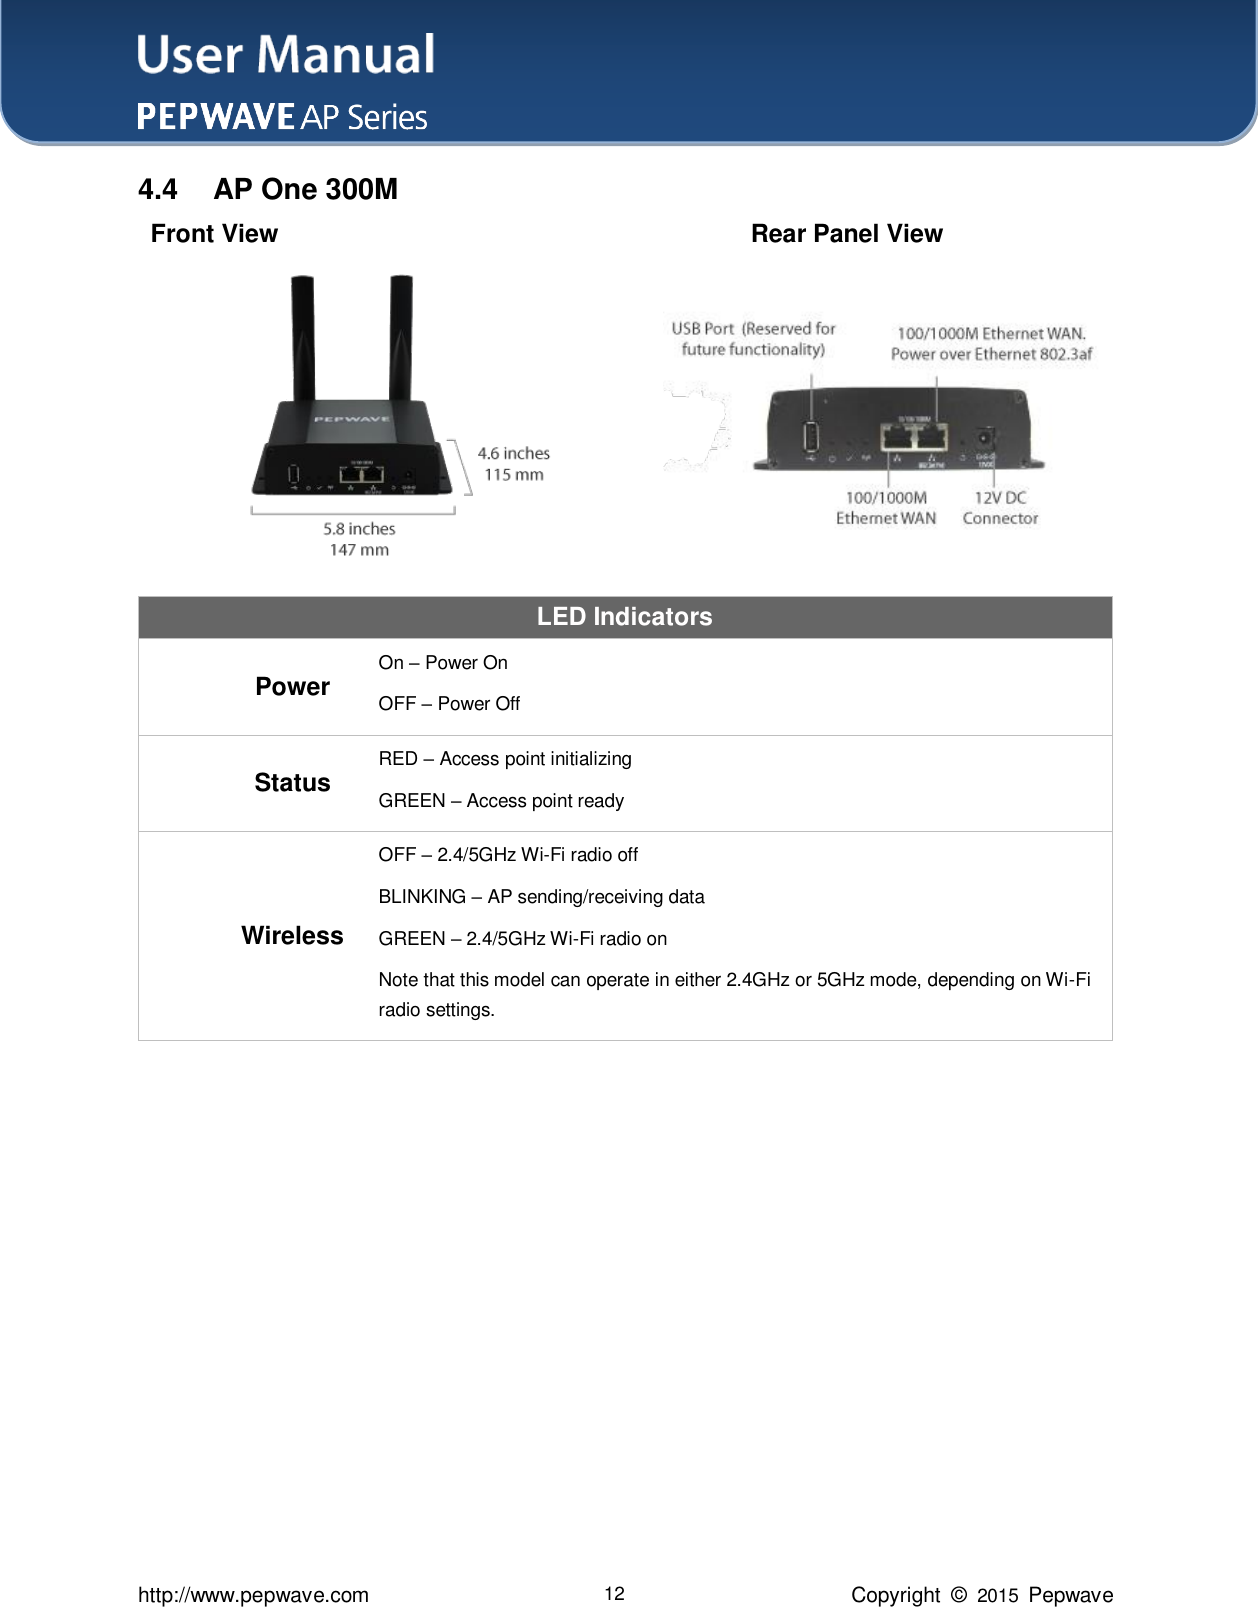 User Manual    http://www.pepwave.com 12 Copyright  ©  2015  Pepwave 4.4  AP One 300M  Front View                      Rear Panel View                         LED Indicators   Power On – Power On OFF – Power Off   Status RED – Access point initializing GREEN – Access point ready   Wireless OFF – 2.4/5GHz Wi-Fi radio off BLINKING – AP sending/receiving data GREEN – 2.4/5GHz Wi-Fi radio on Note that this model can operate in either 2.4GHz or 5GHz mode, depending on Wi-Fi radio settings.   